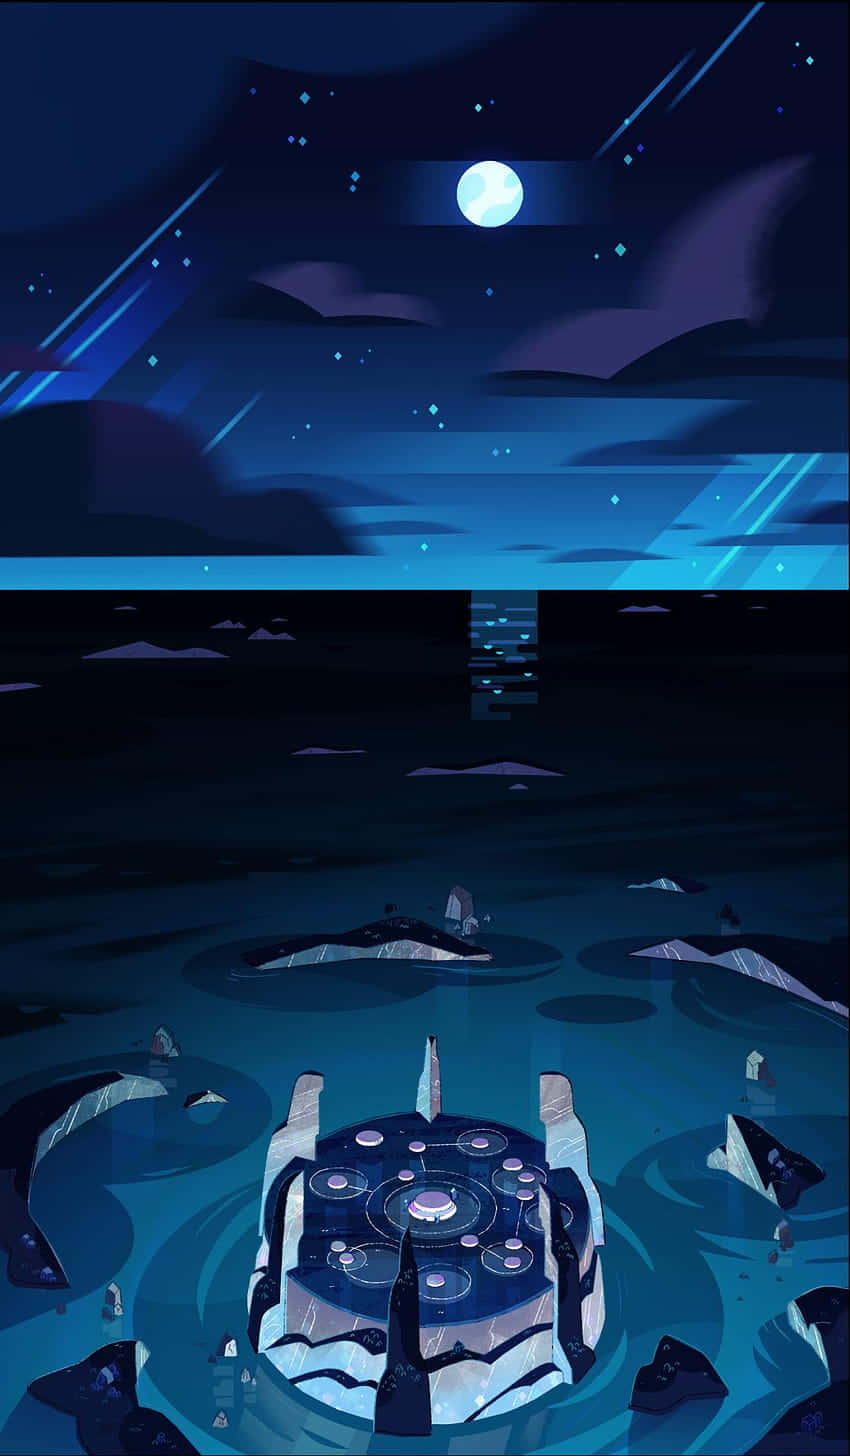 Enjoying the beach with the Steven Universe Phone Wallpaper